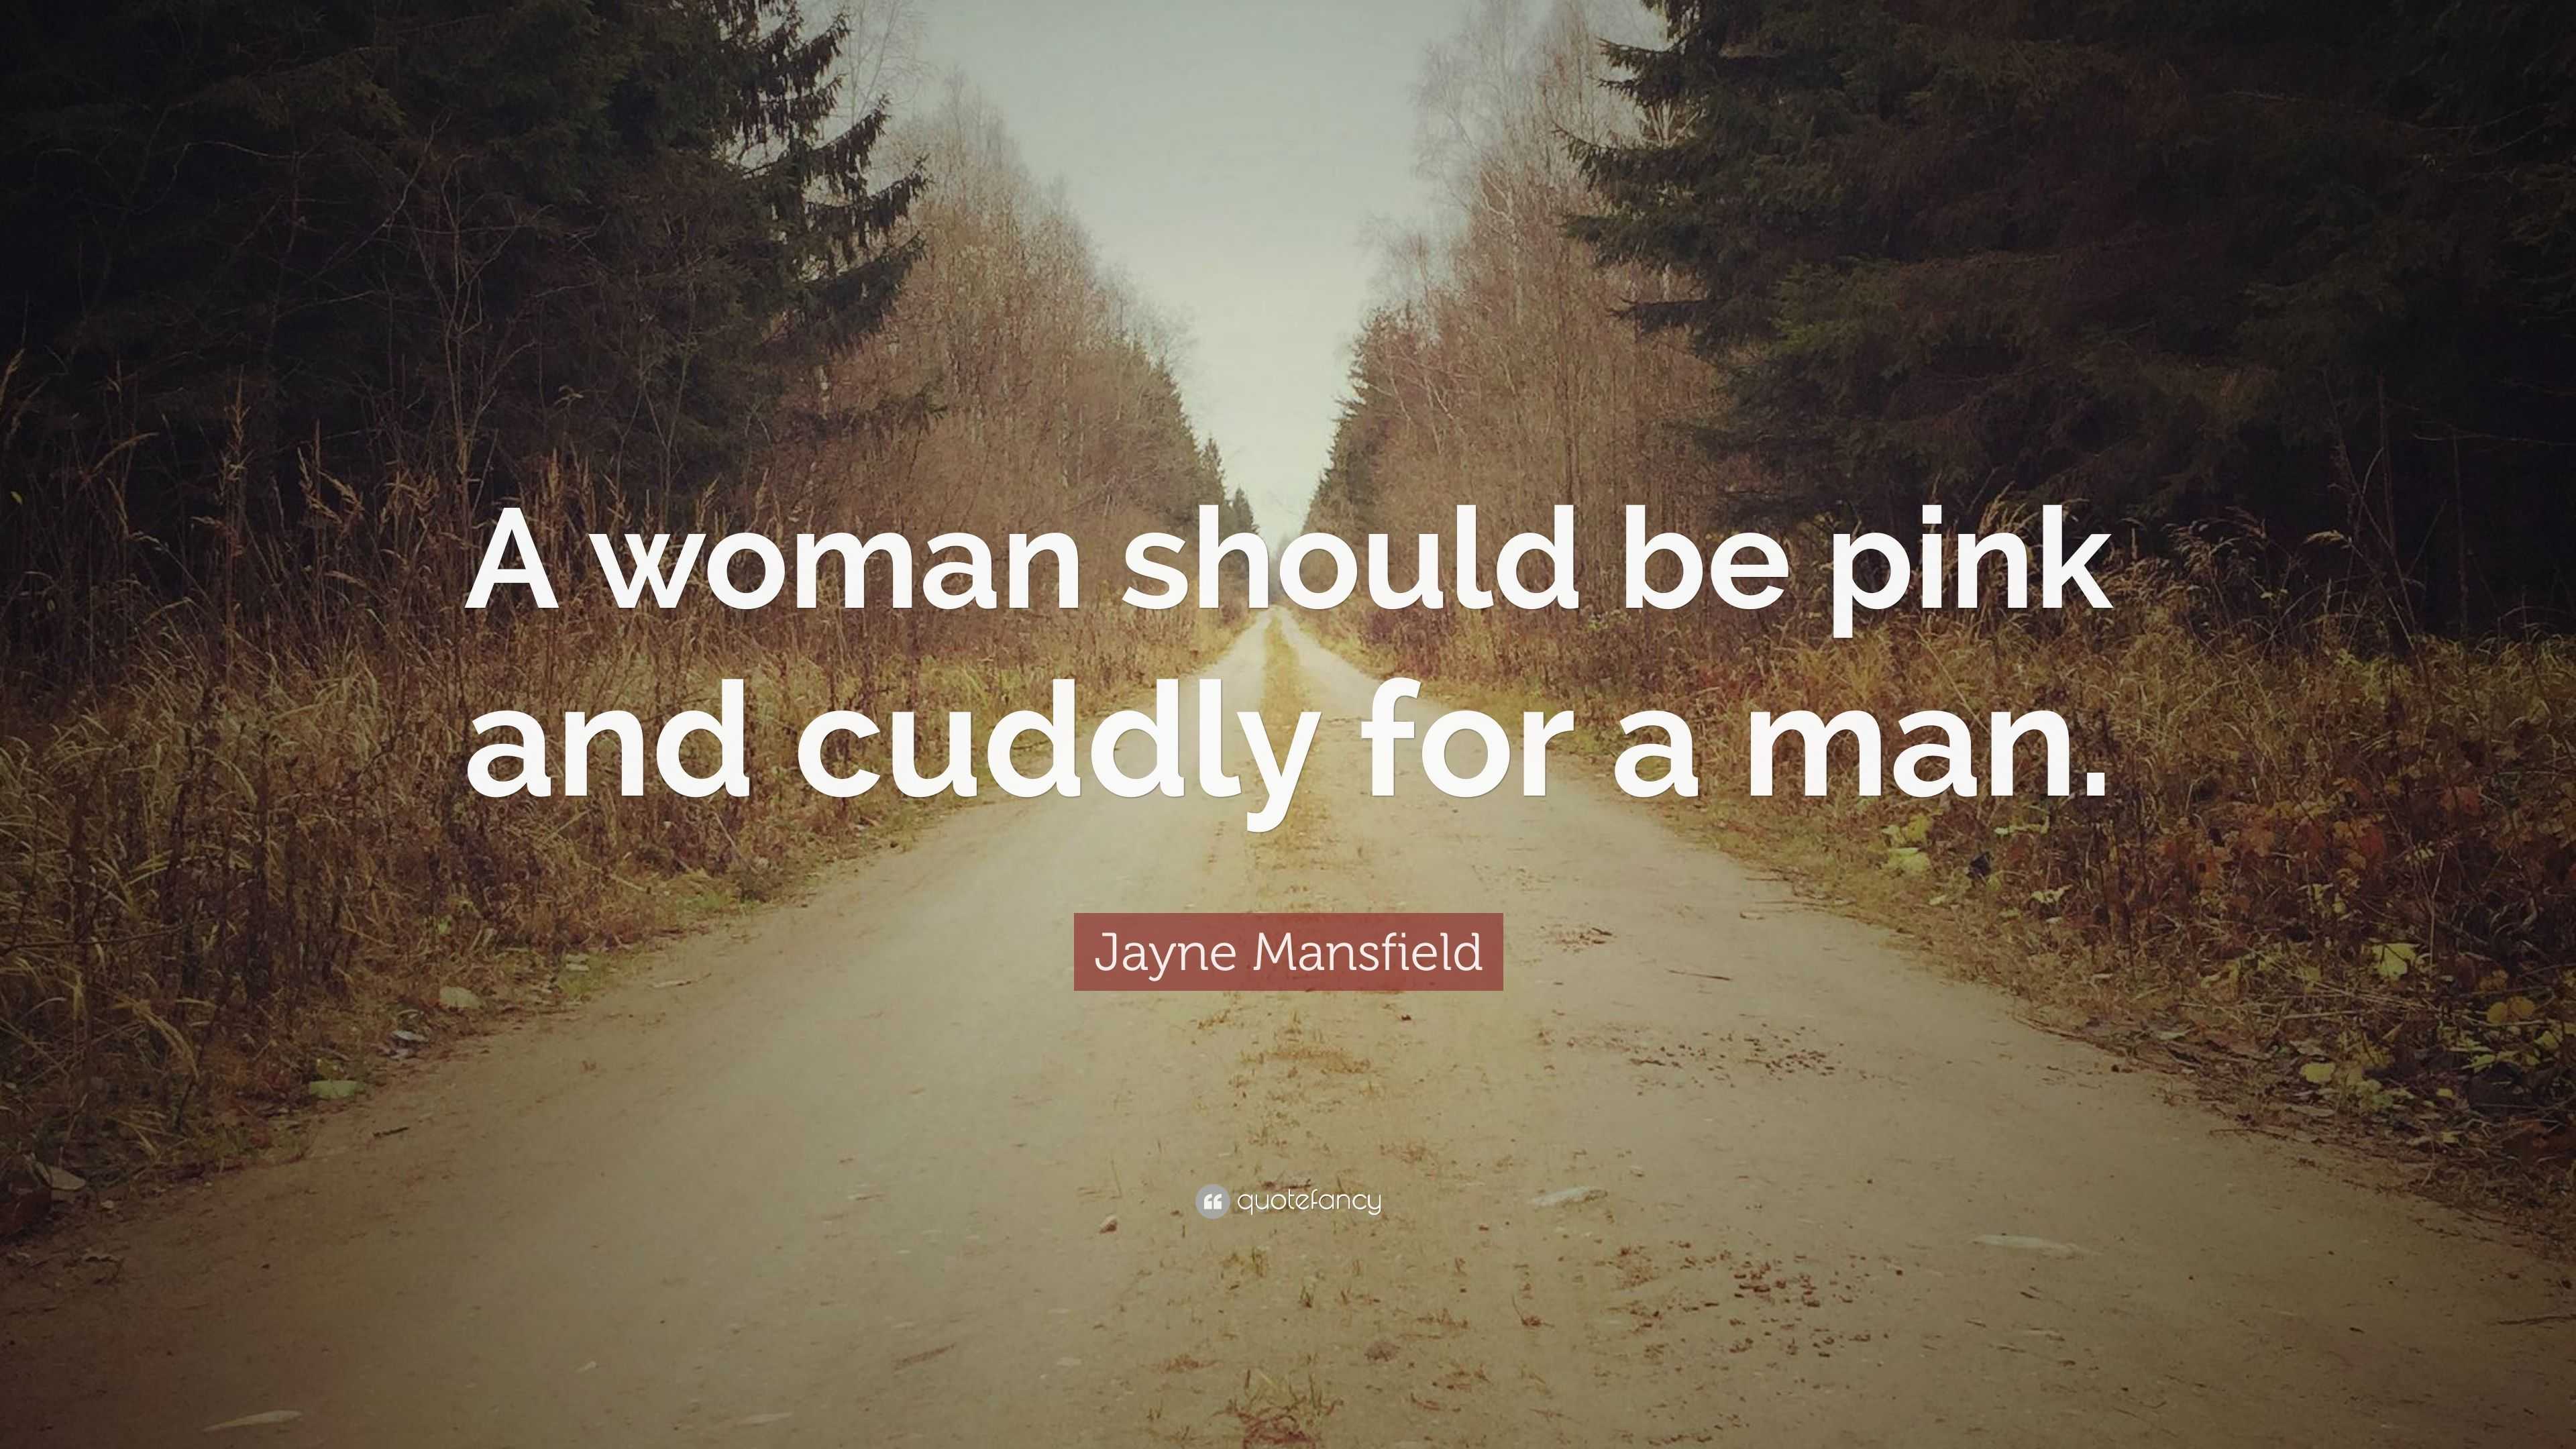 Jayne Mansfield Quote: "A woman should be pink and cuddly for a man." (7 wallpapers) - Quotefancy